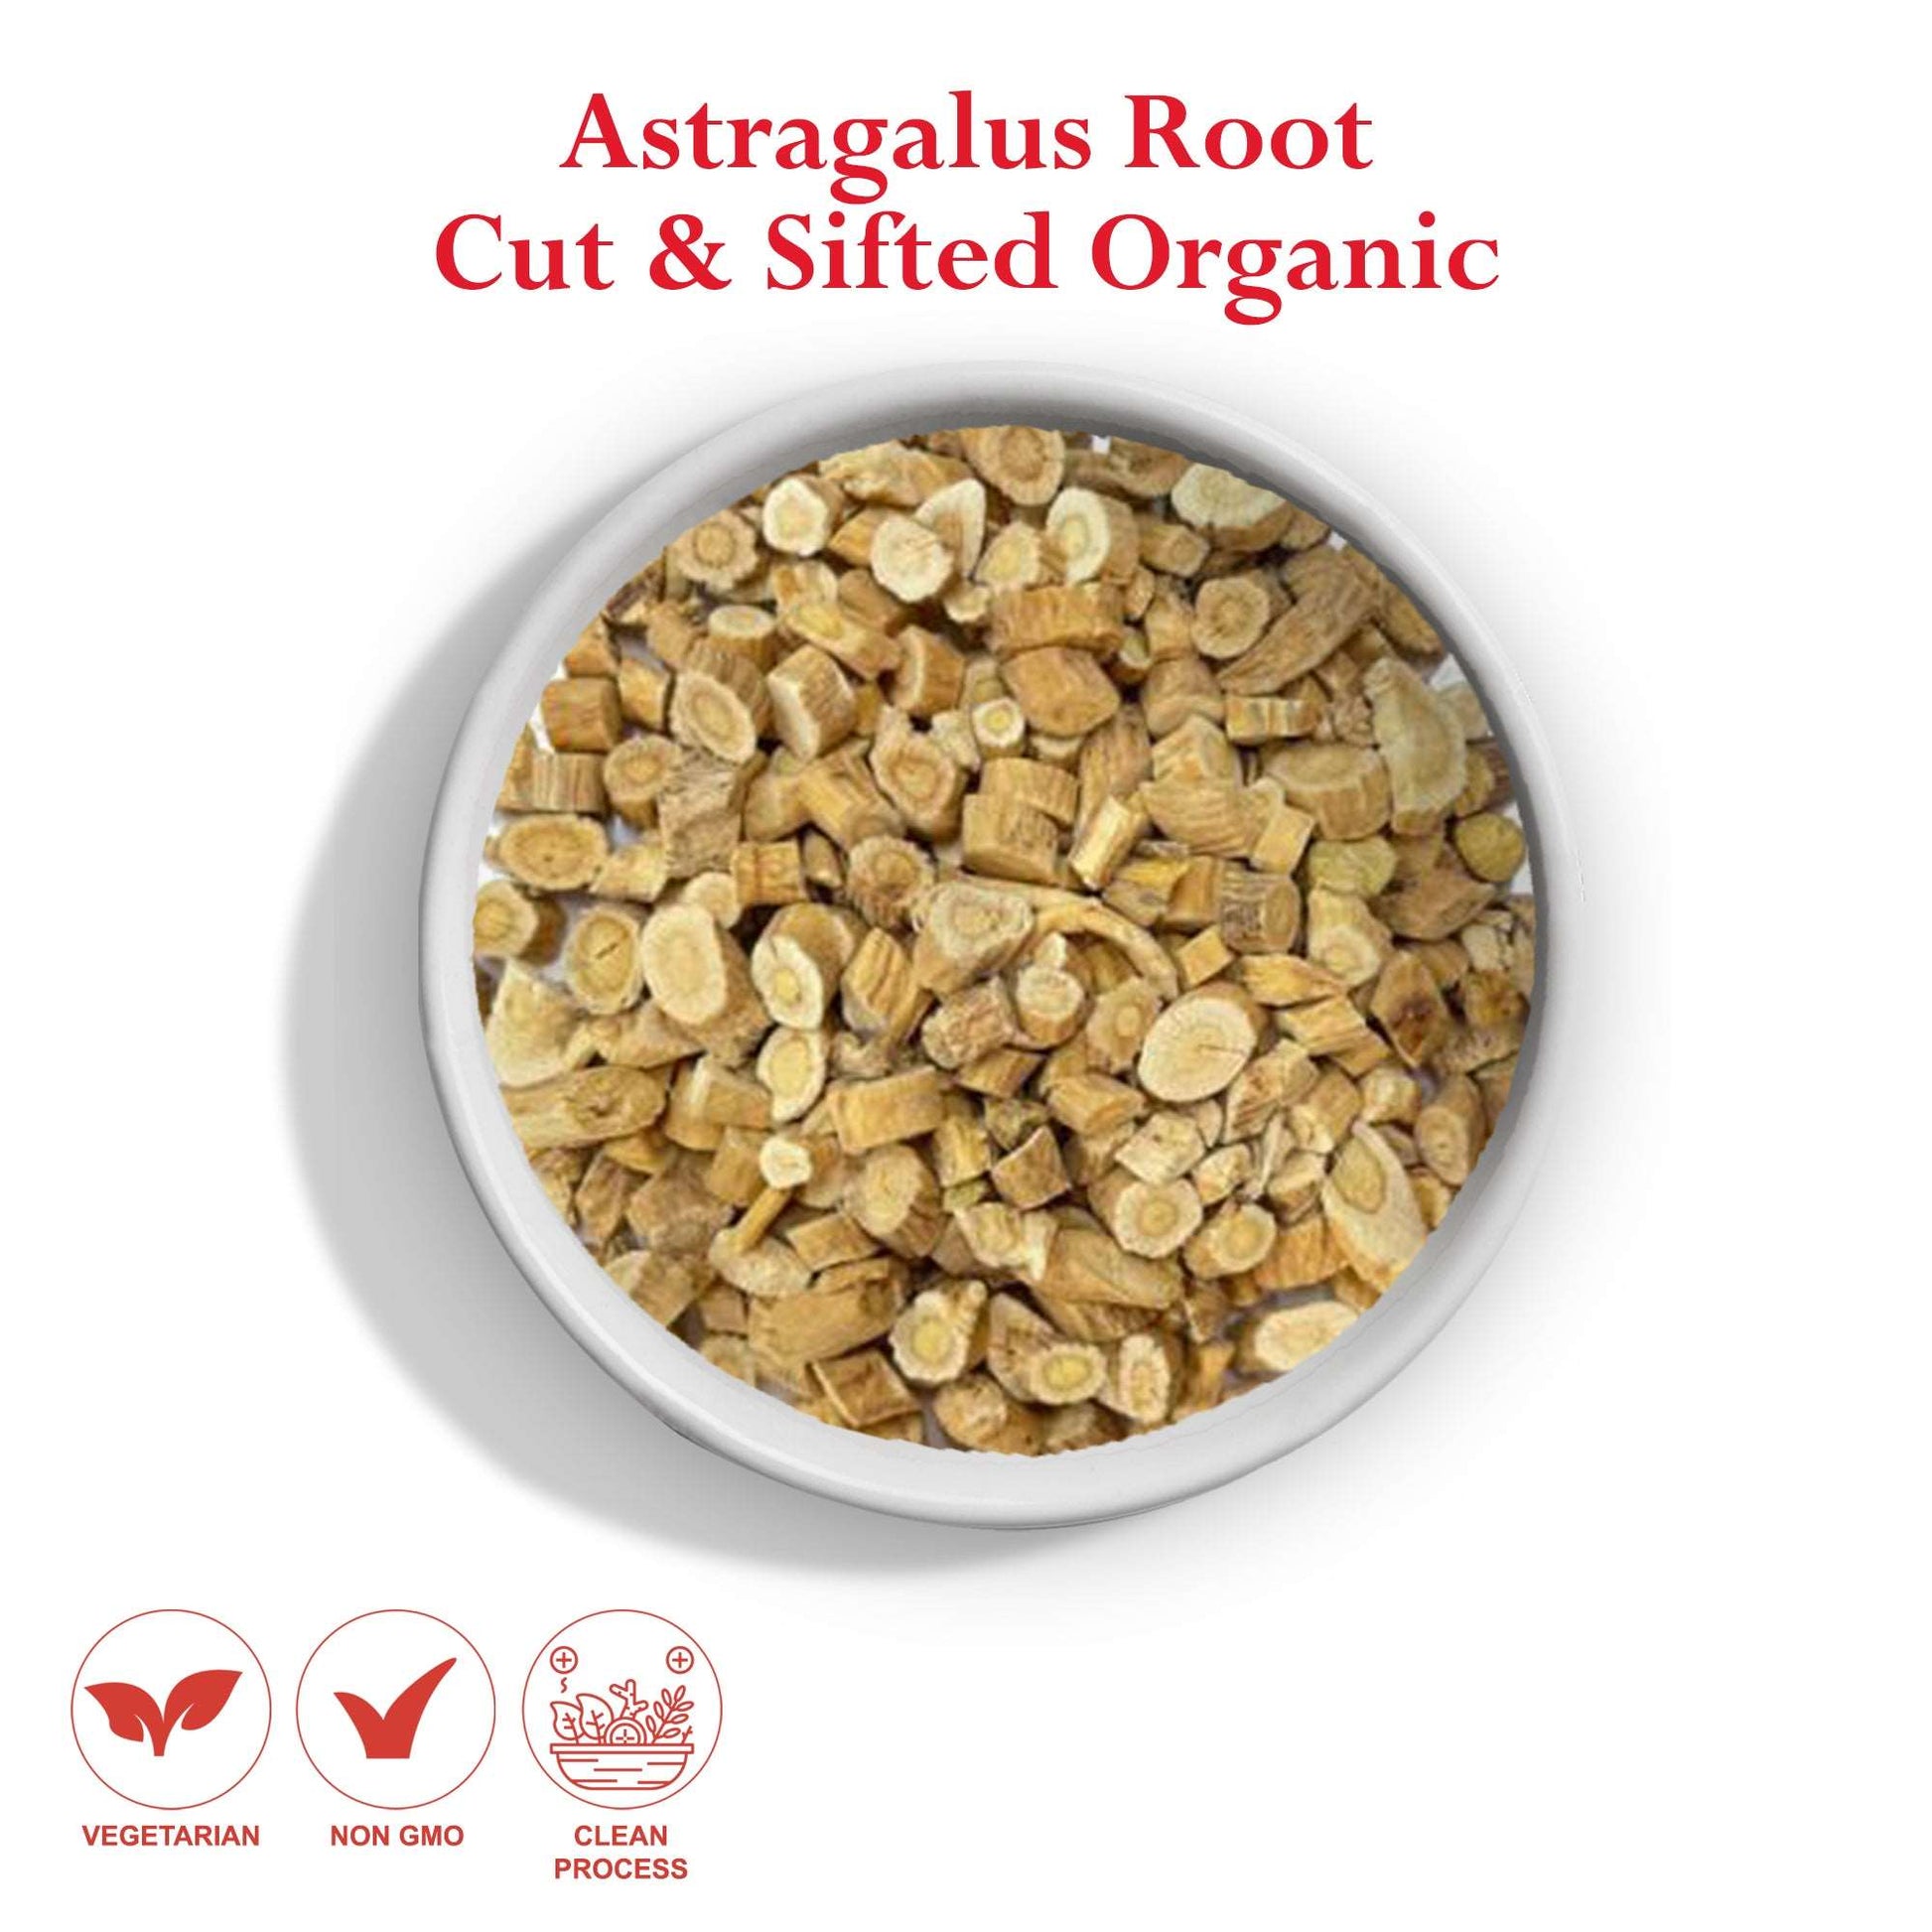 Astragalus Root Cut & Sifted Organic